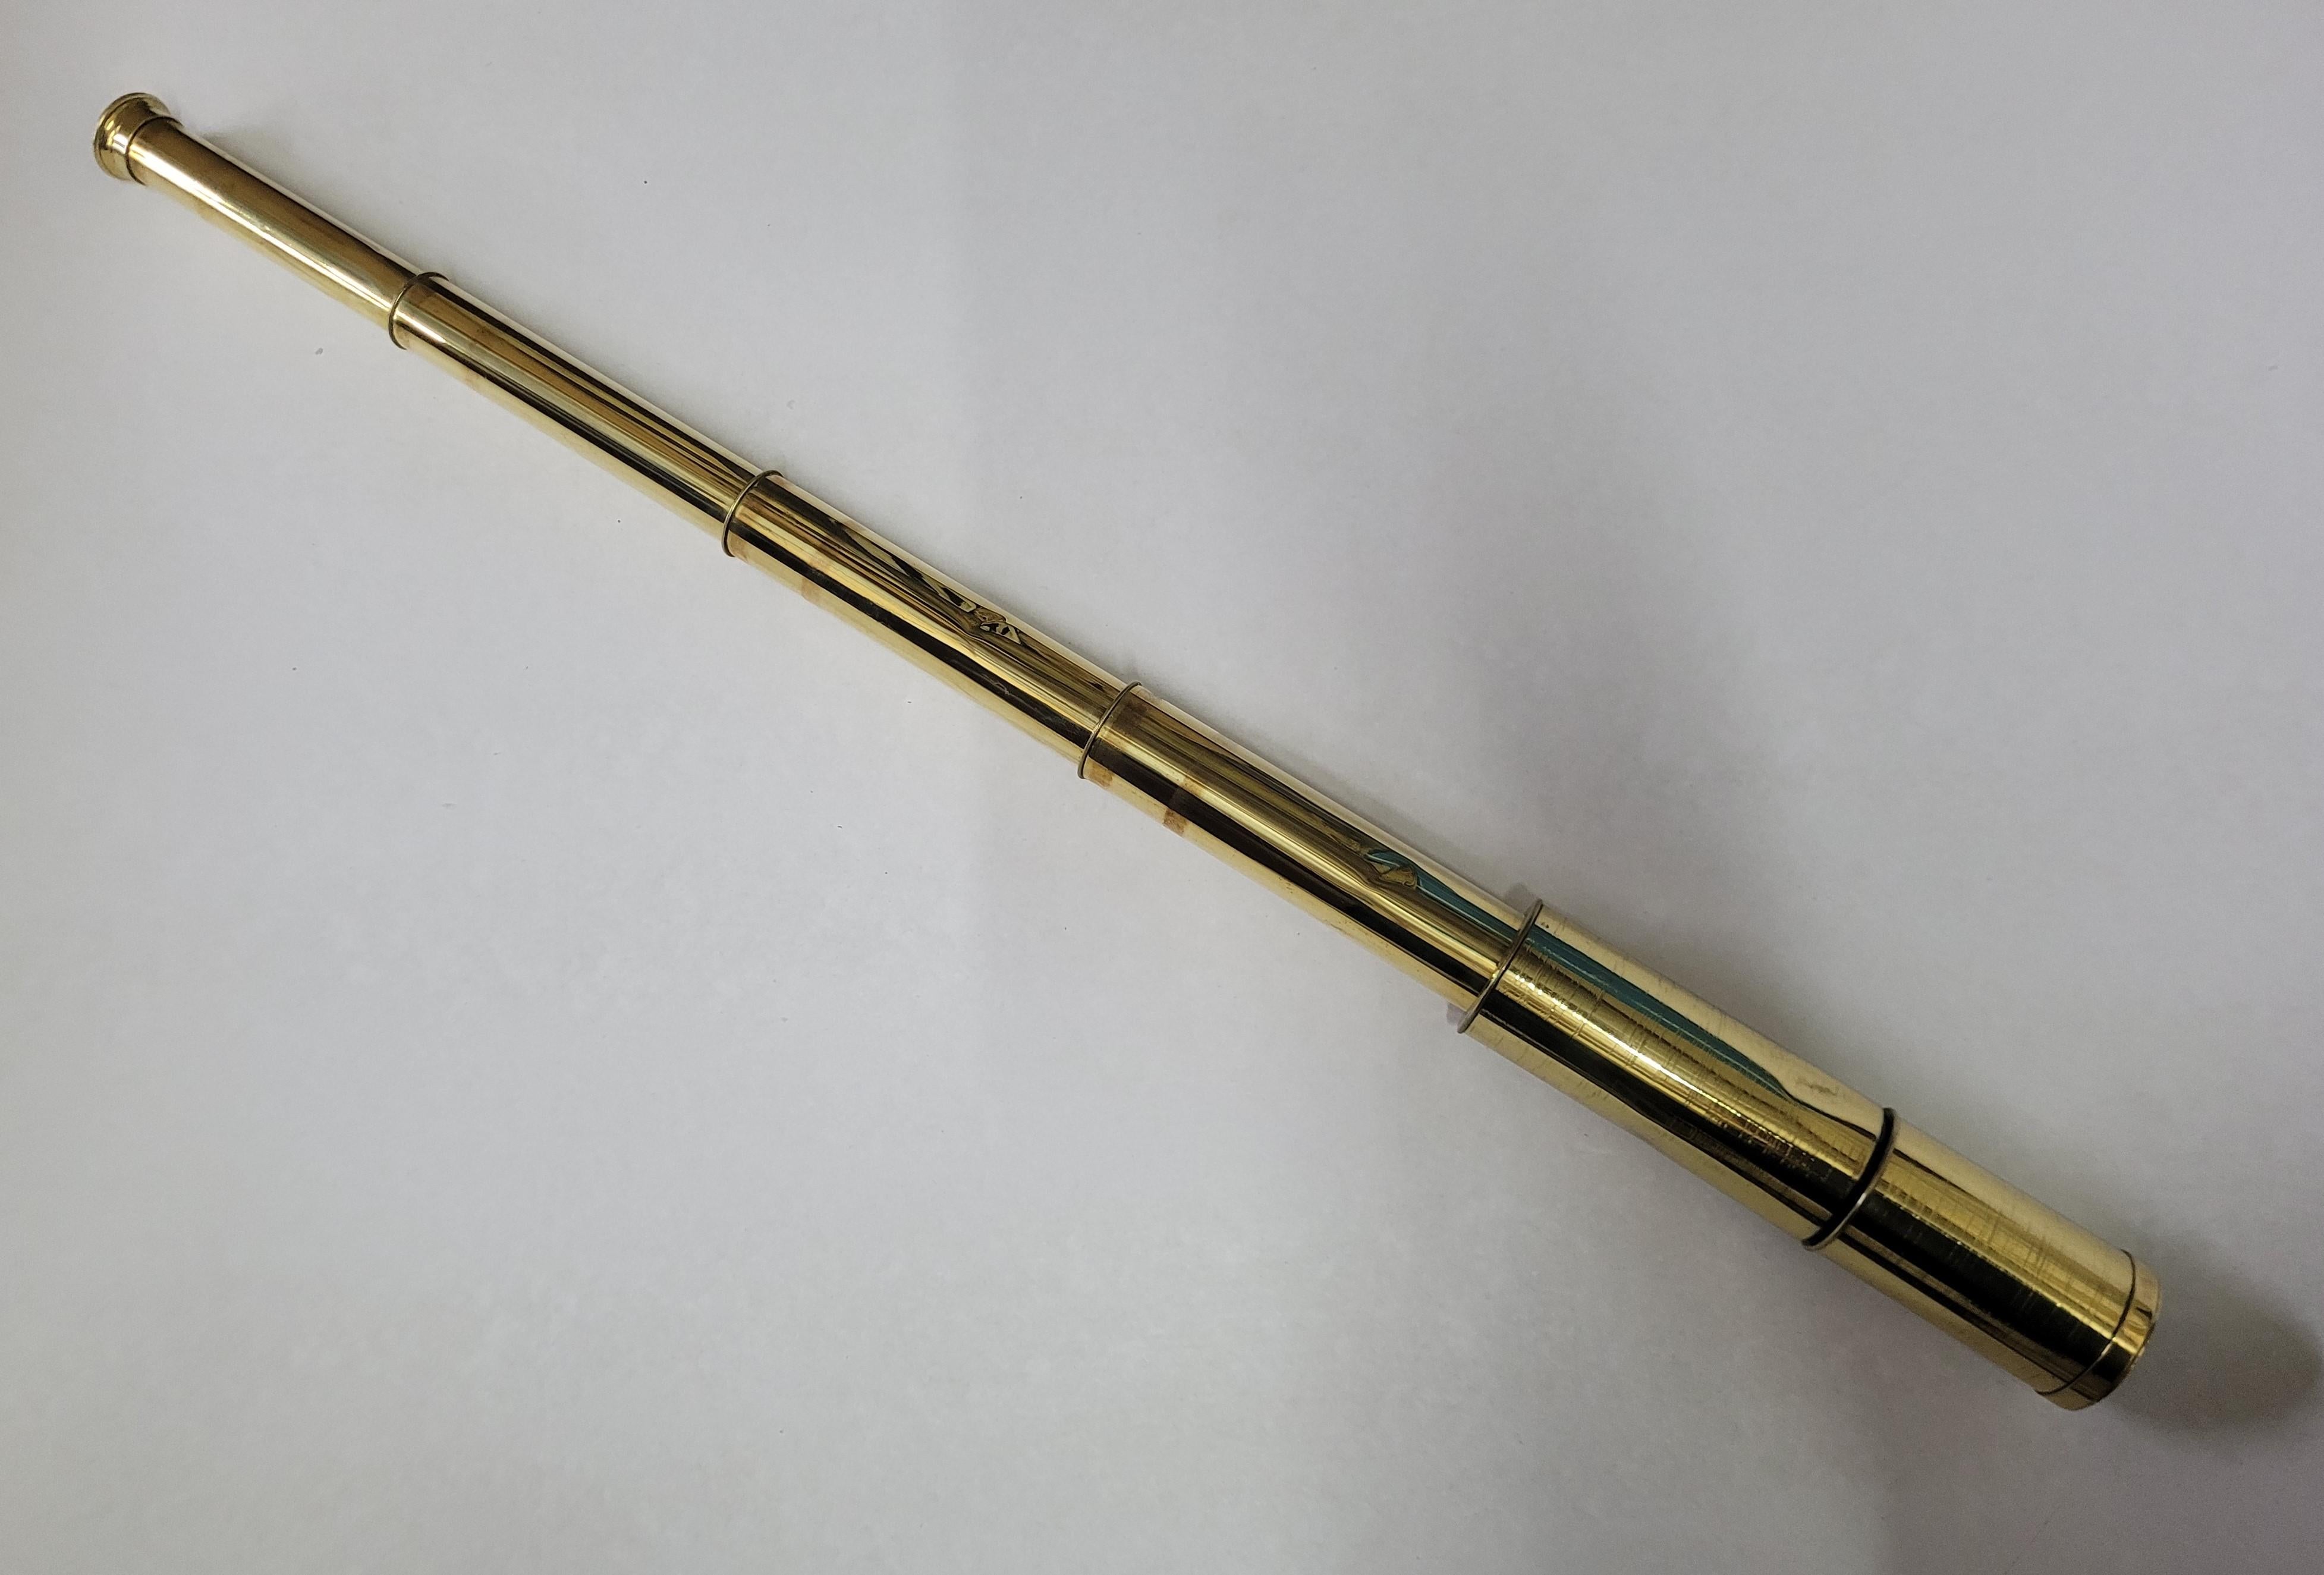 Brass telescope appropriate for use on land or sea. This has been meticulously polished and lacquered. We just restored a great collection of these. This fine instruement has a four draw barrel of solid brass. Circa 19. Focal tube is engraved Rifle